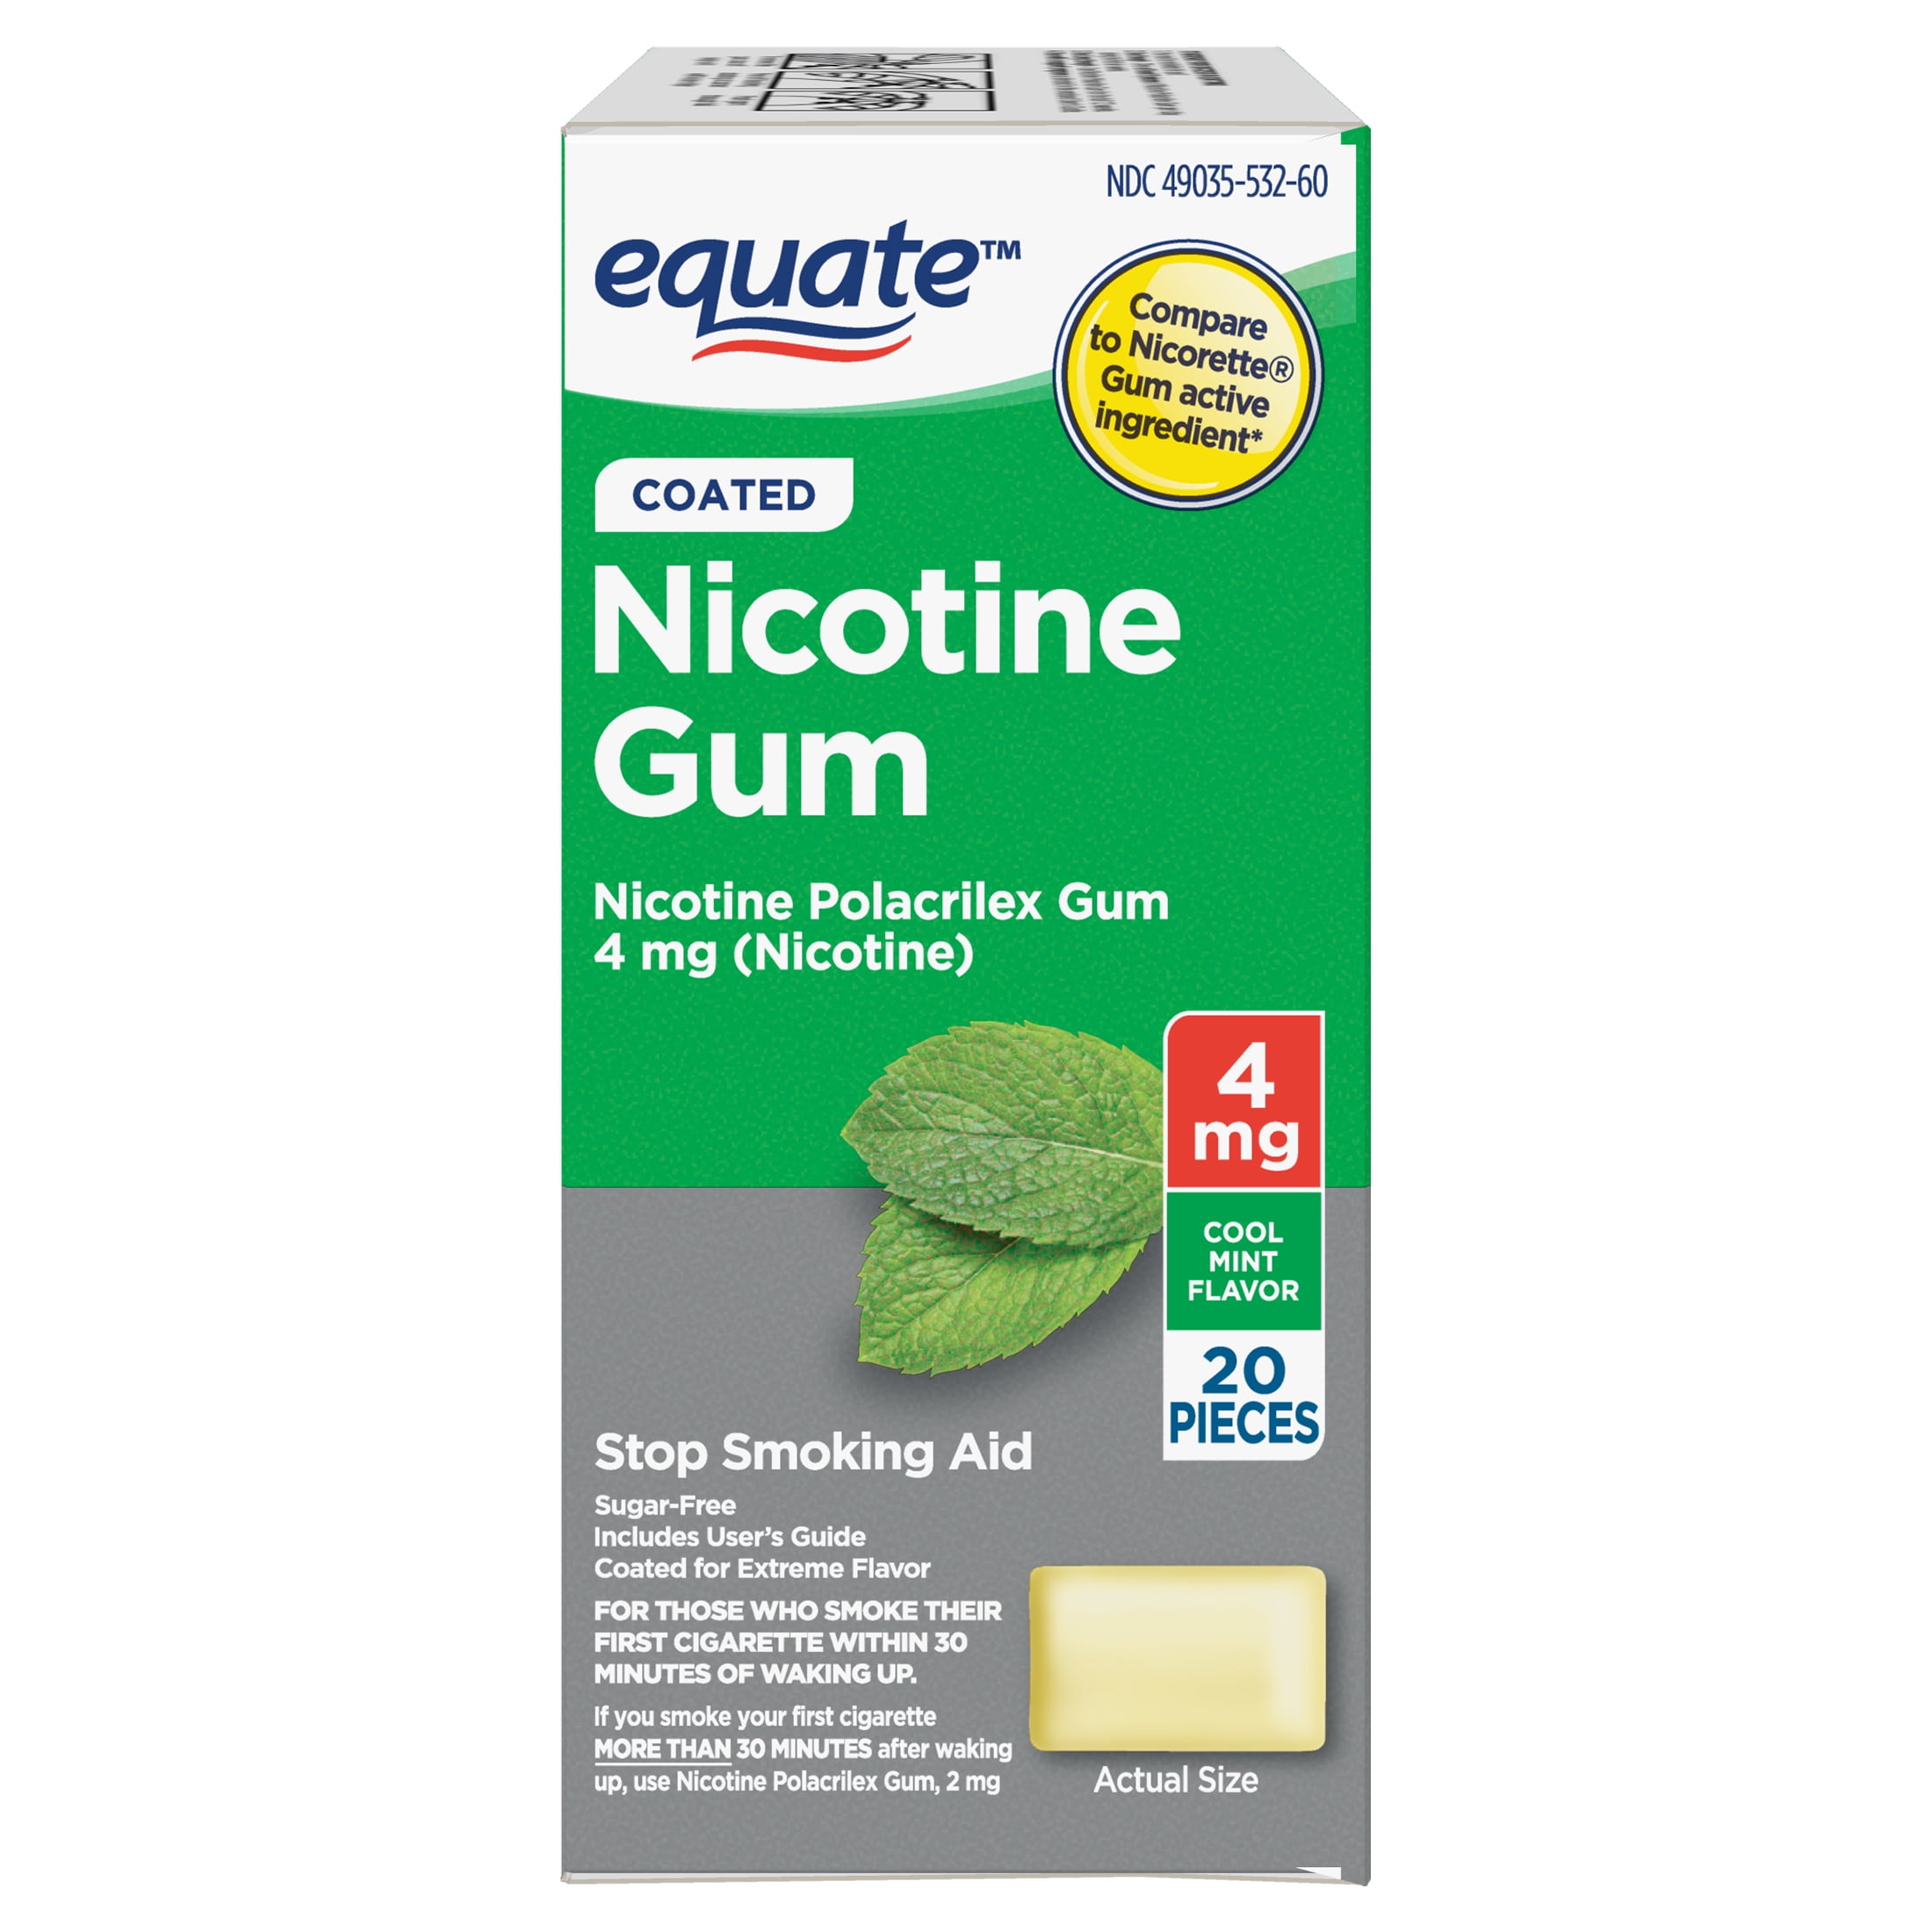 Equate Coated Nicotine Polacrilex Gum 4 mg, Mint Flavor, 20 Count ...